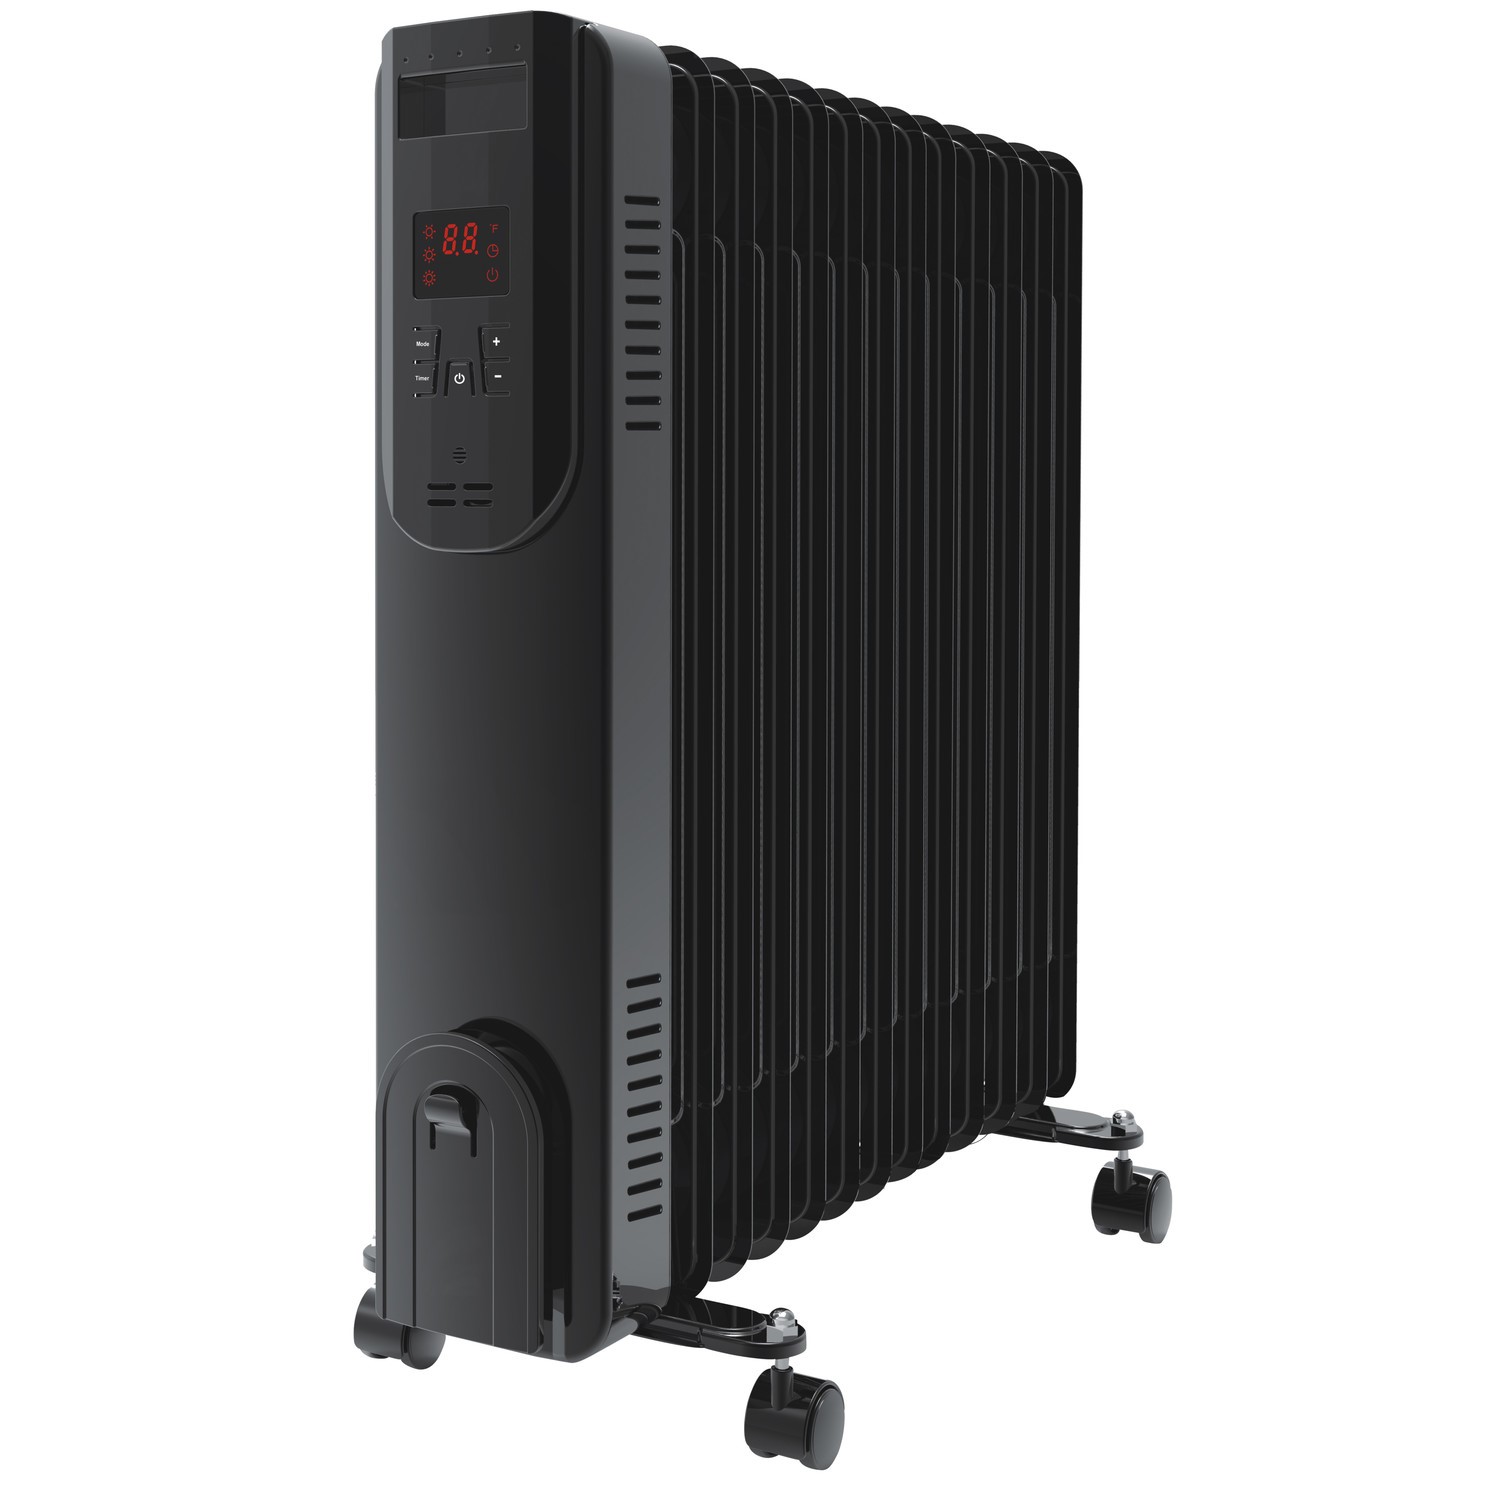 electriQ 2.5kw Black Smart WiFi Alexa Oil Filled Radiator 11 Fin 24 hour and Weekly Timer with Therm